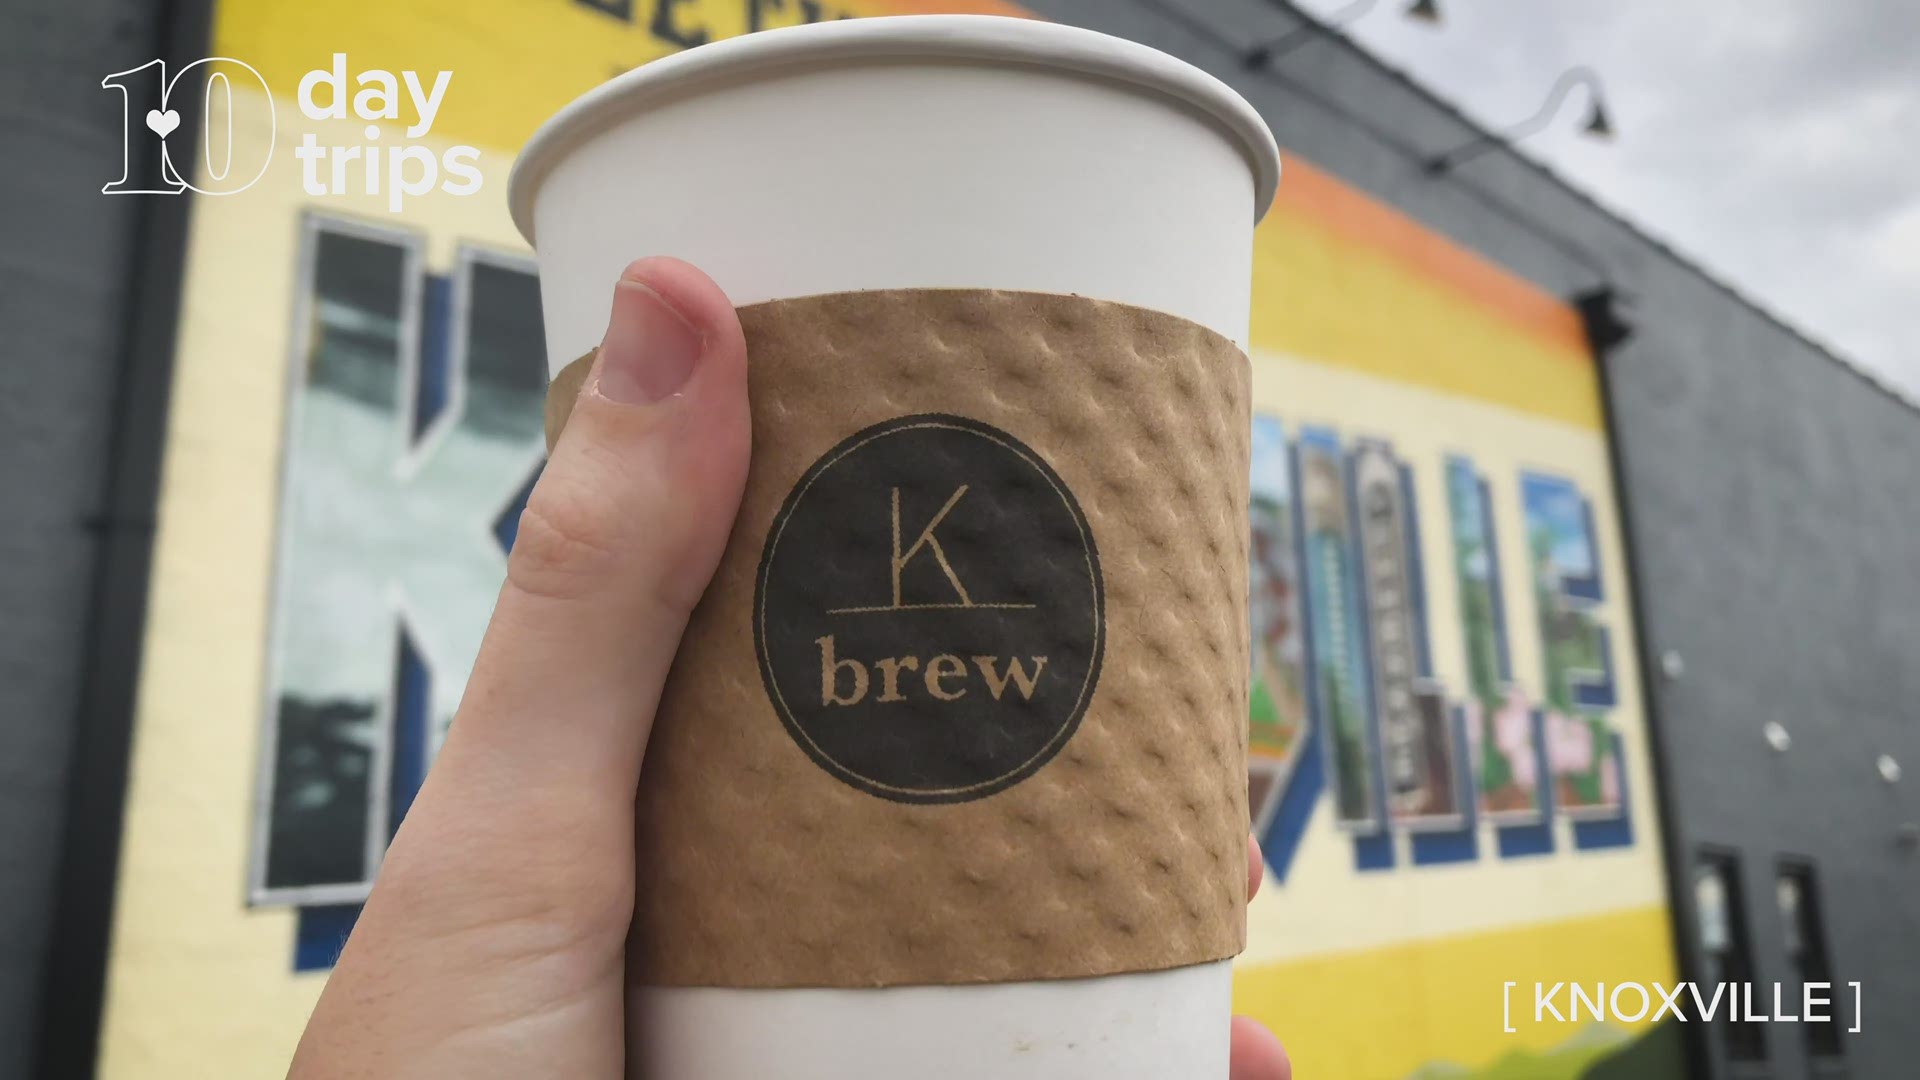 Start your day in Knoxville off right with a cup o' joe that's brewed with love.